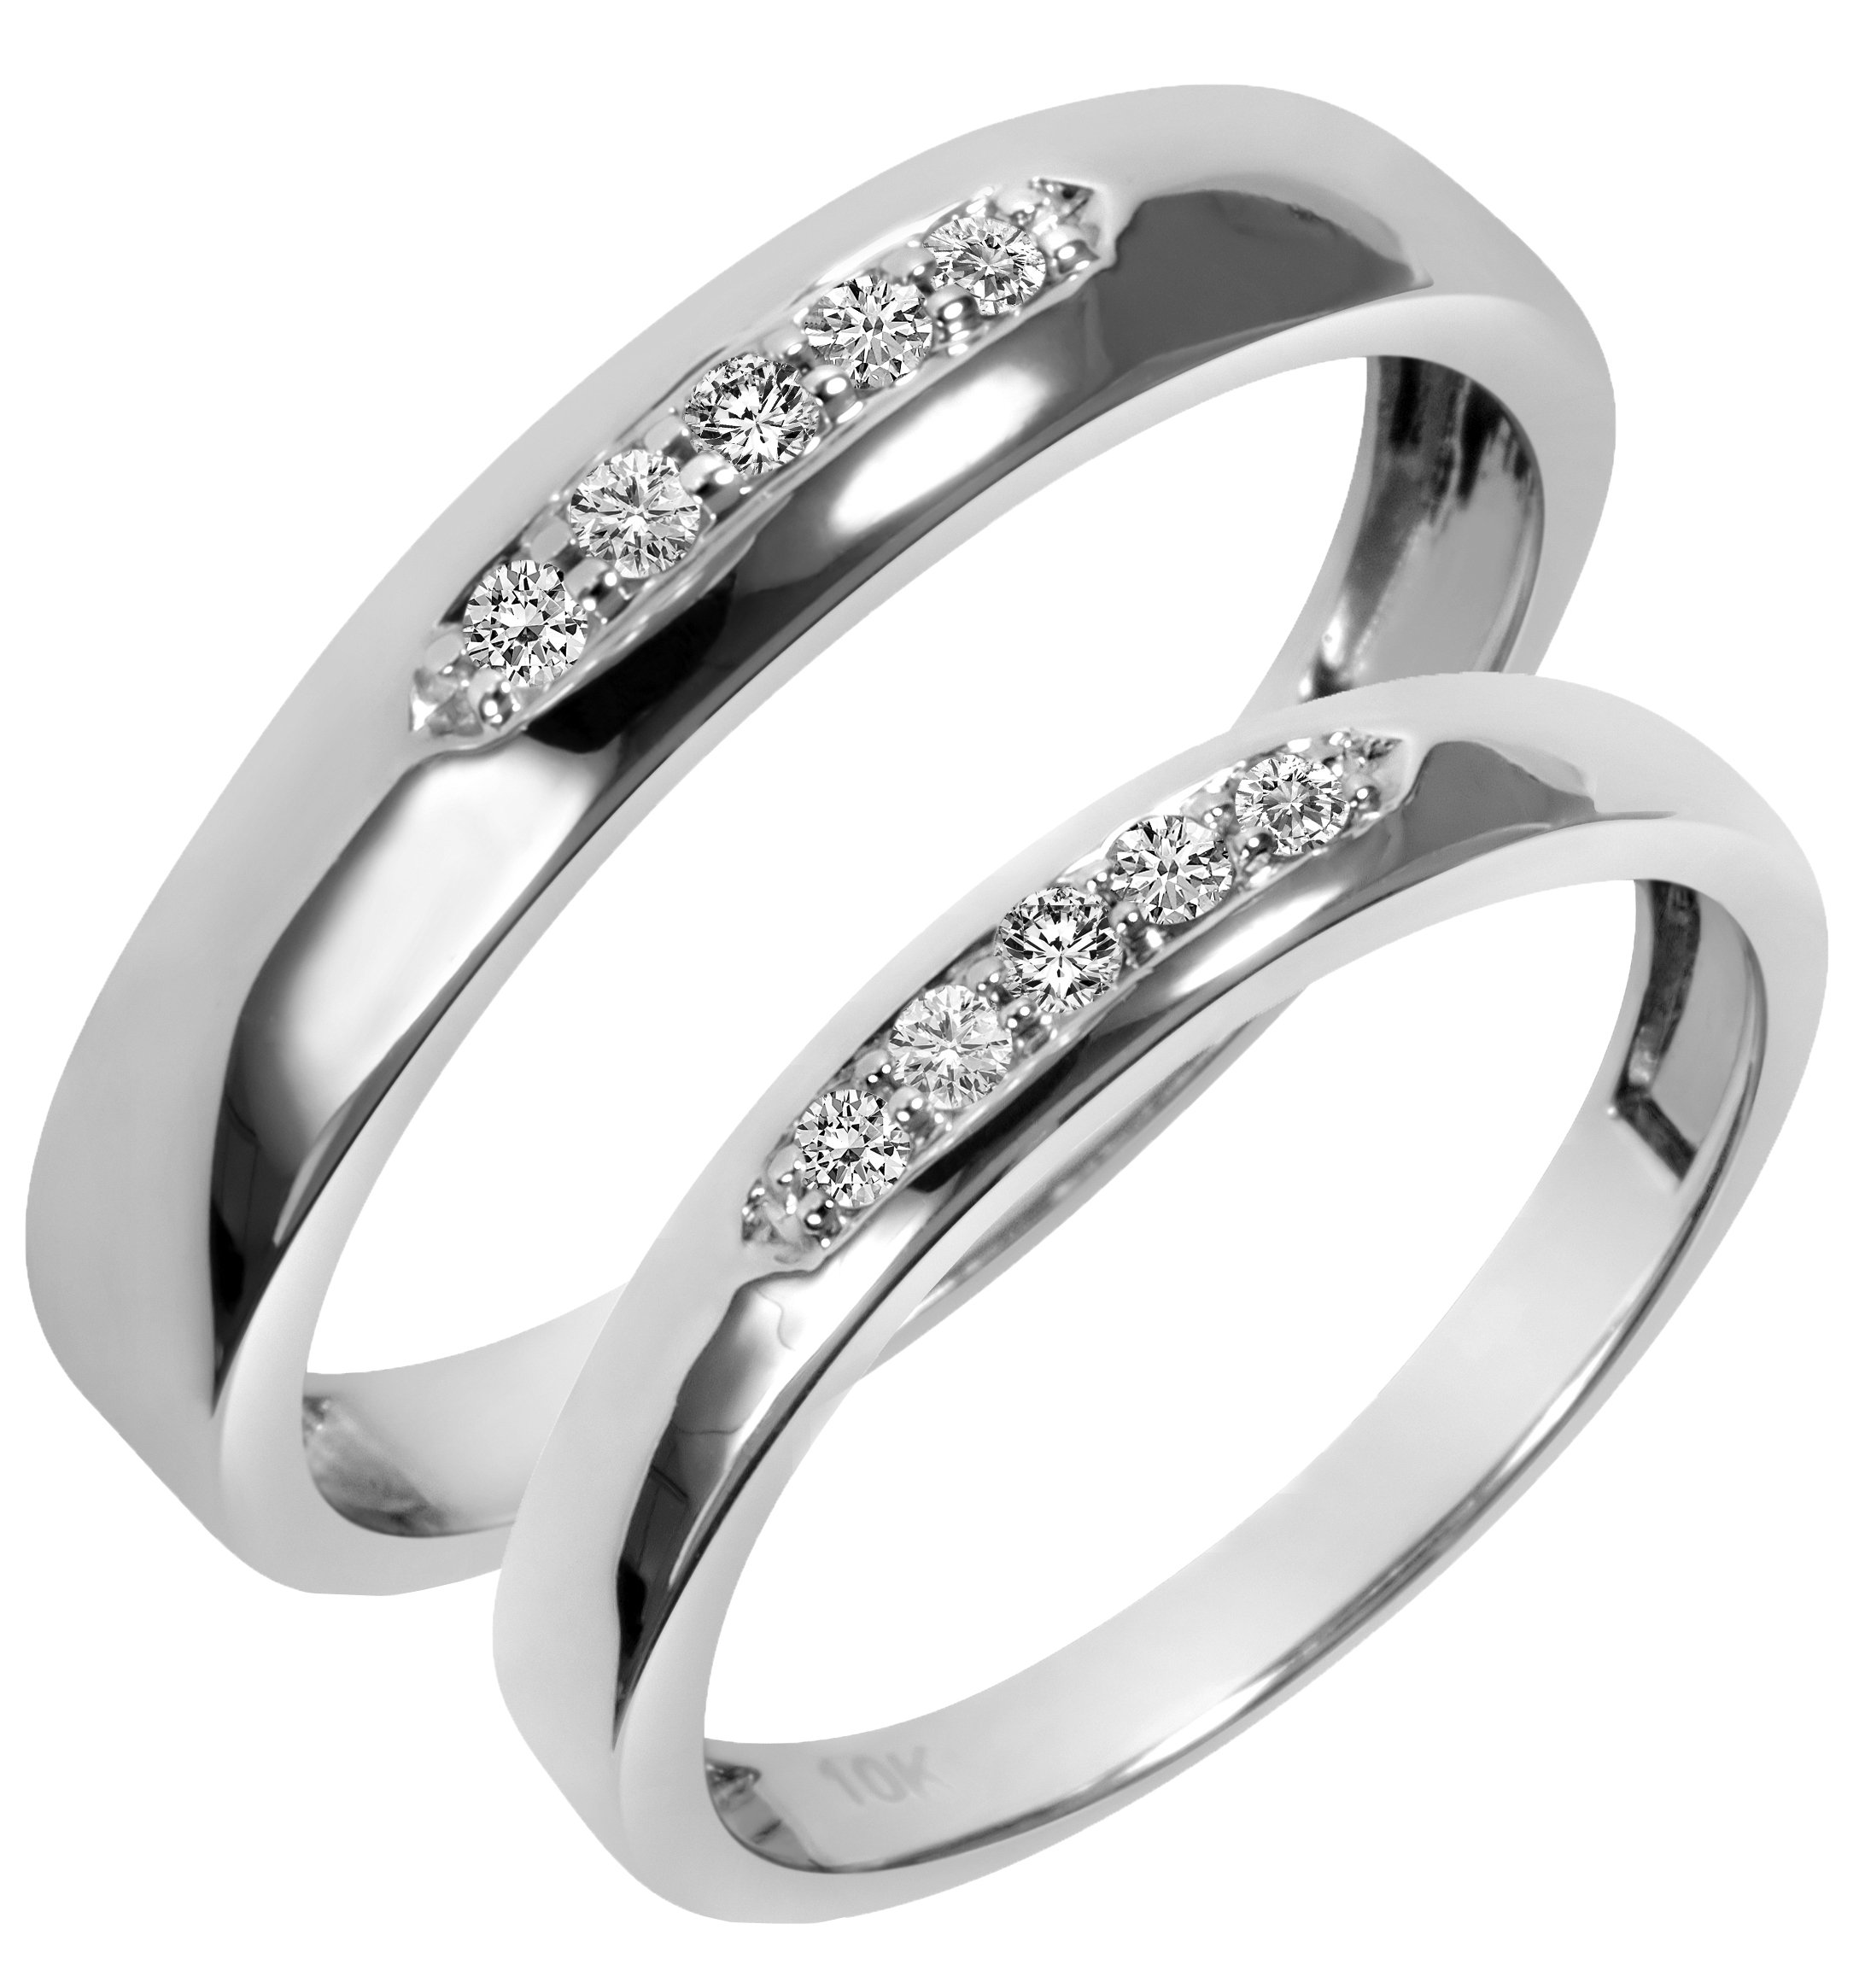 Luxury 35 of Wedding Band Sets His And Hers White Gold